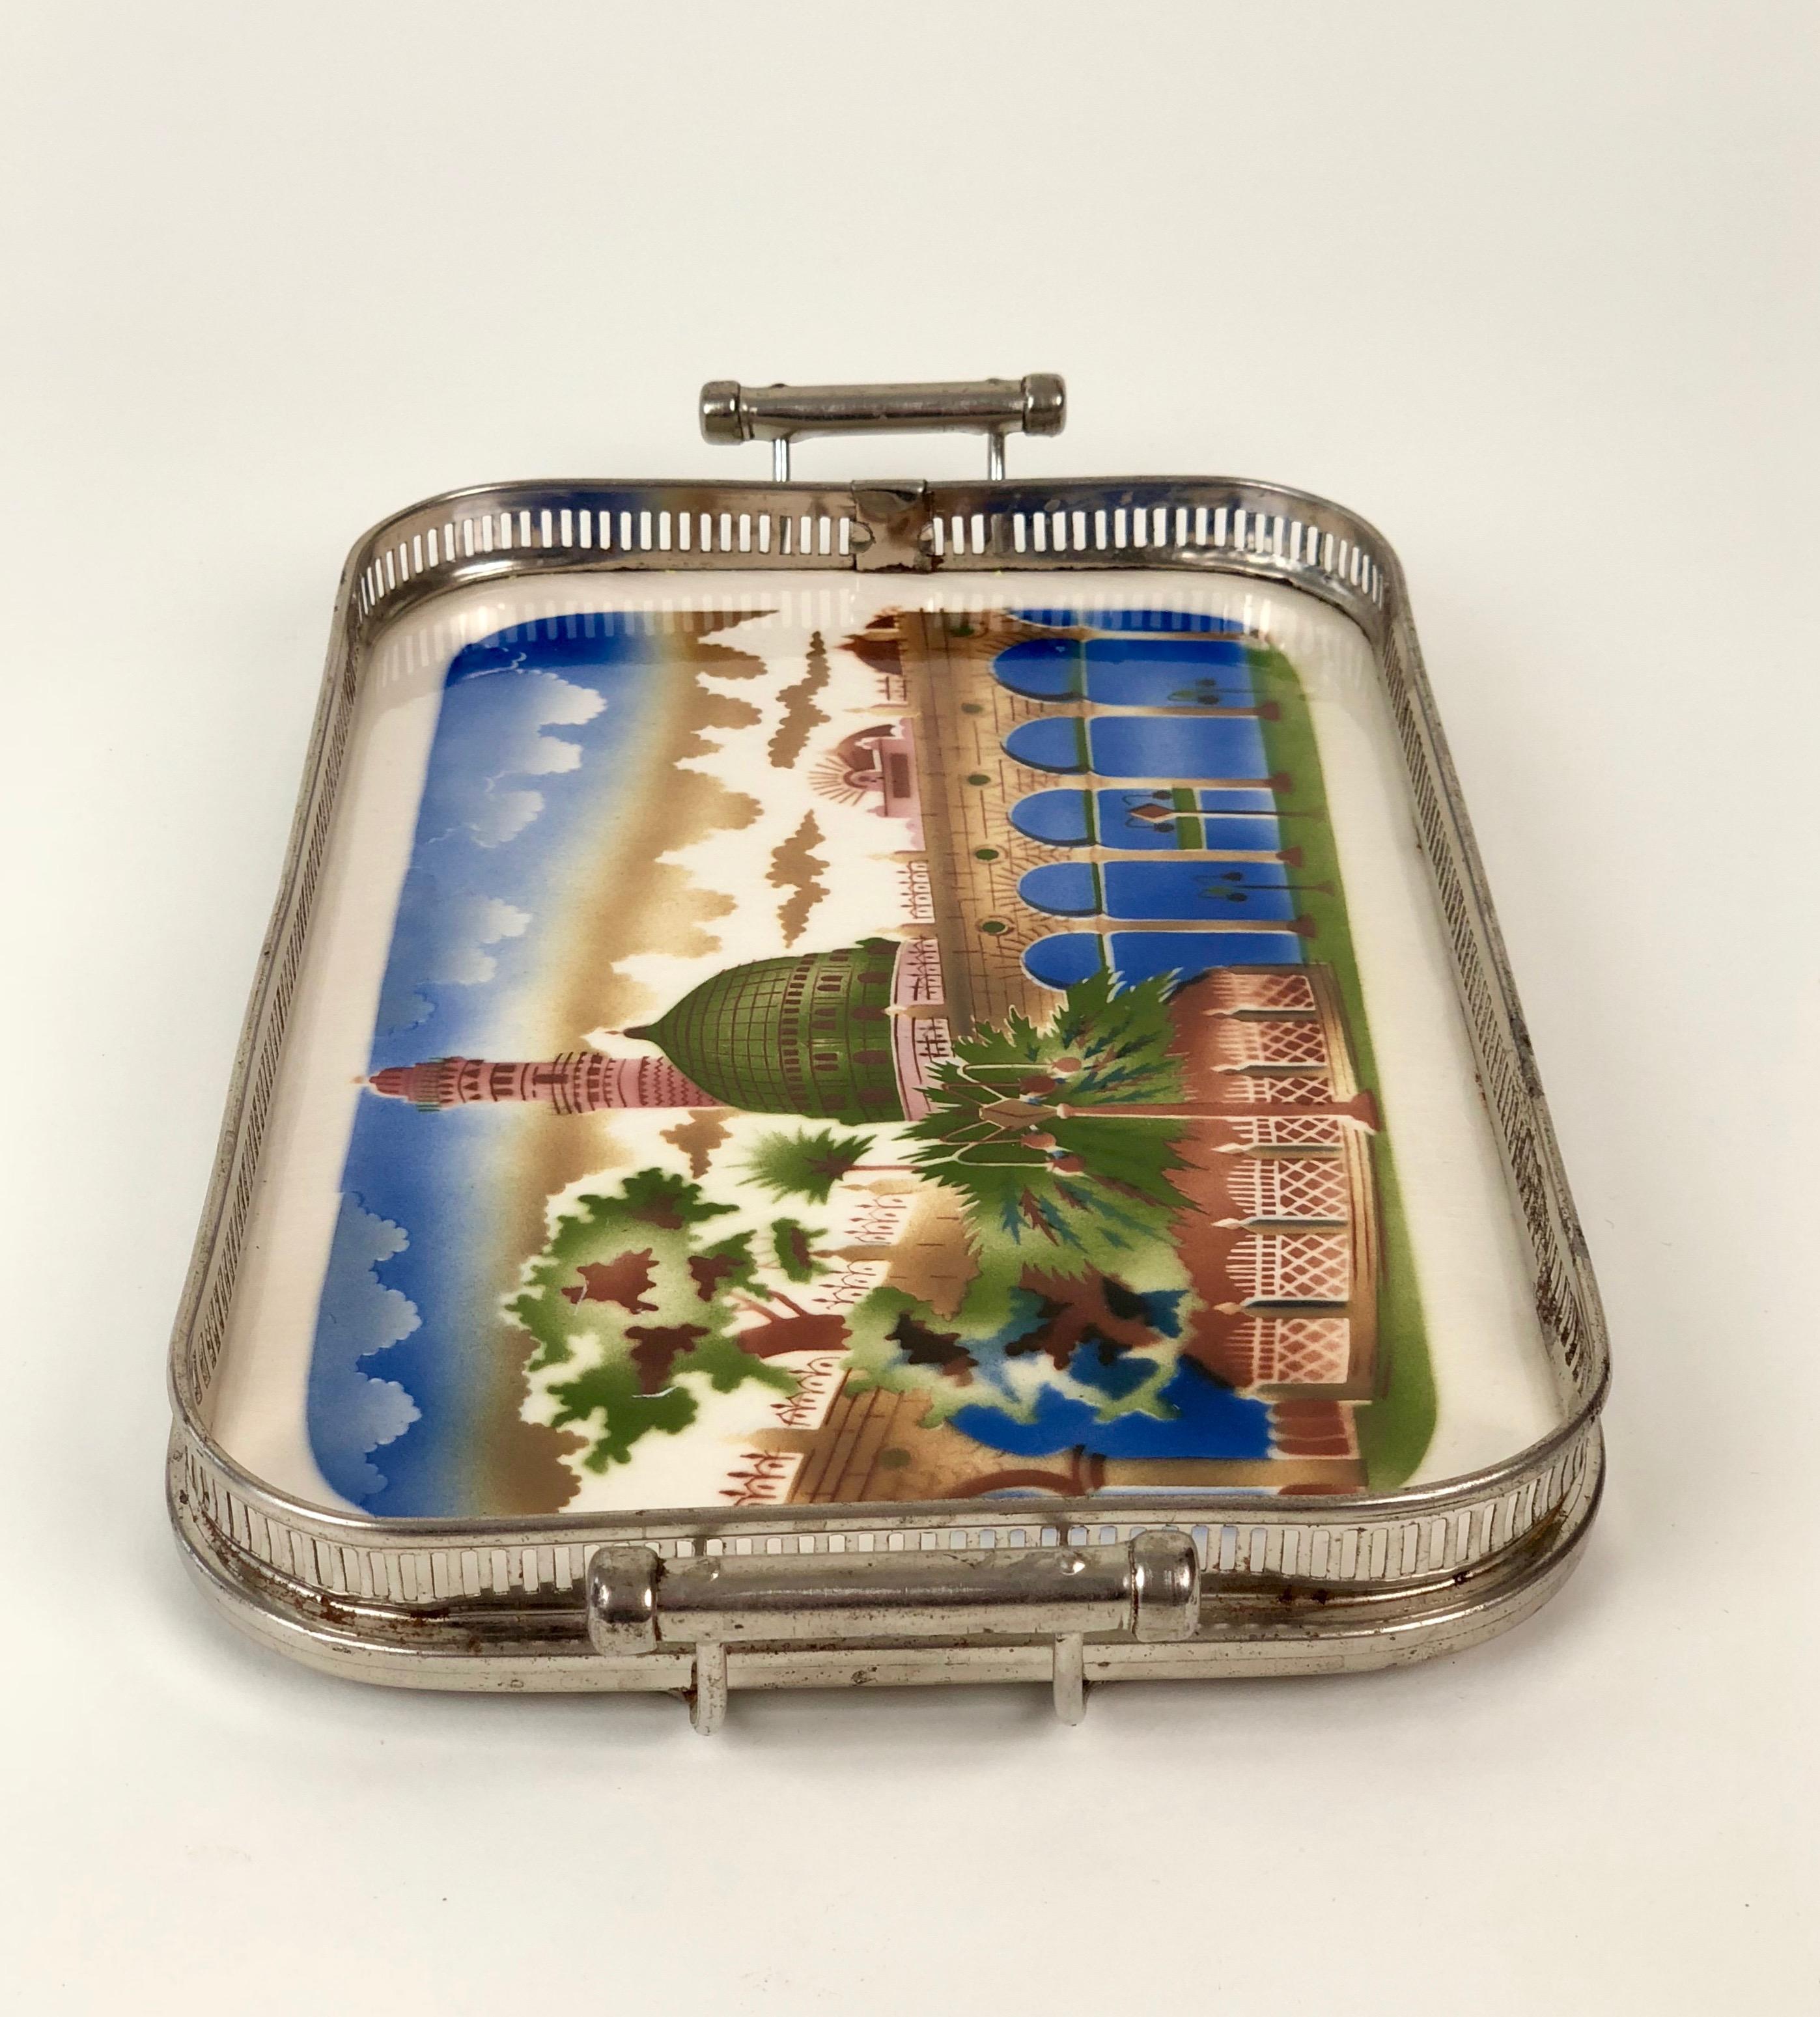 Early 20th Century Ceramic Tray with Metal Montage and Oriental Motive from the 1920s For Sale